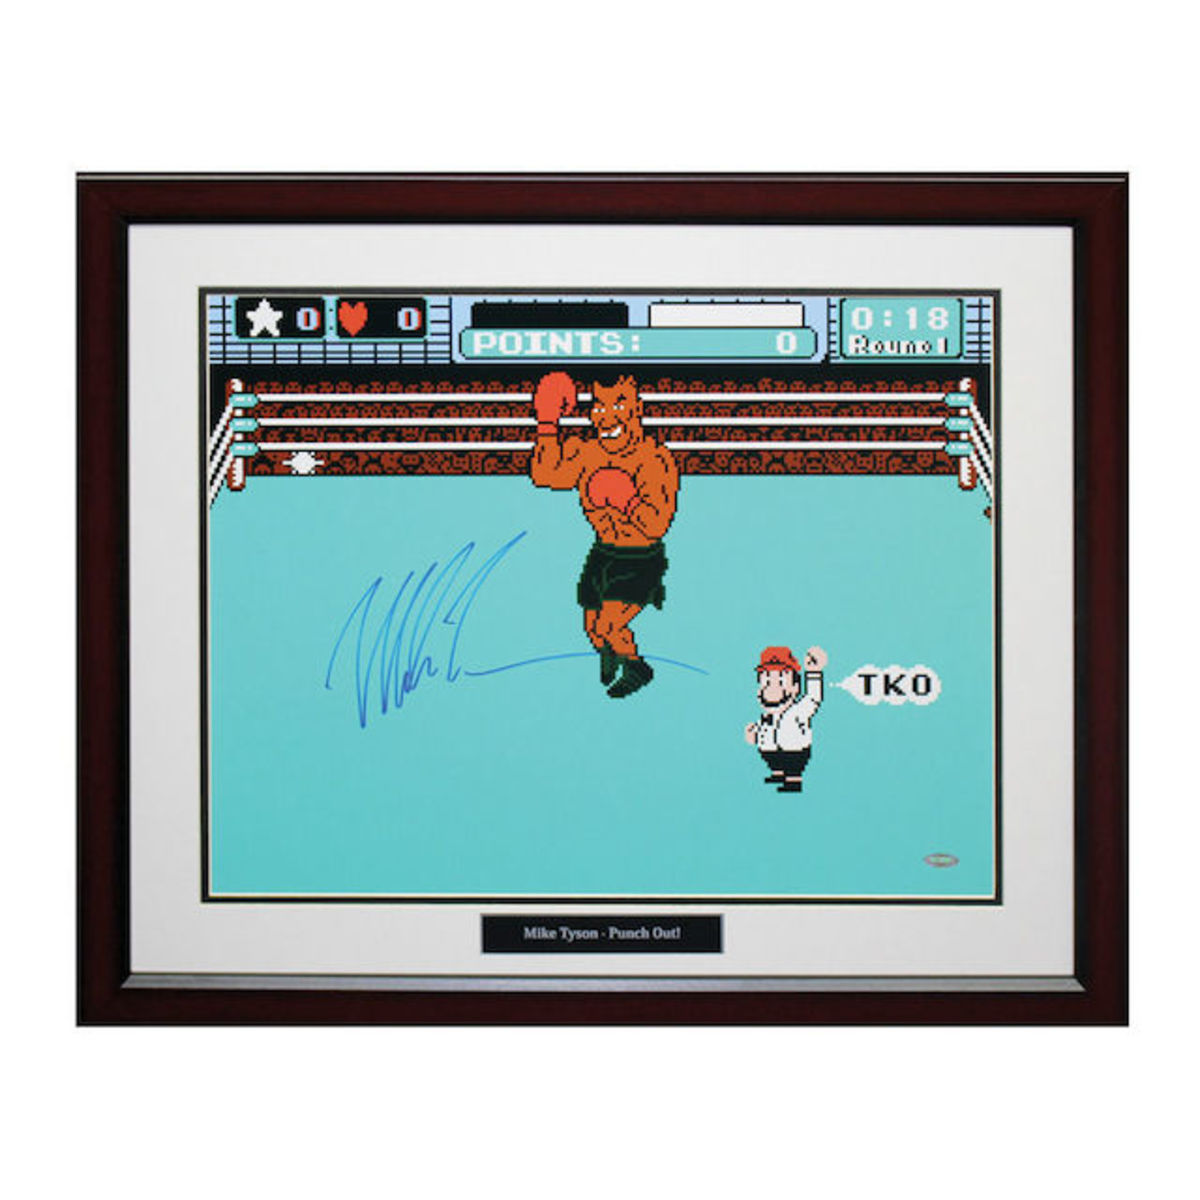 MIKE TYSON PUNCH OUT SIGNED PHOTO.jpg